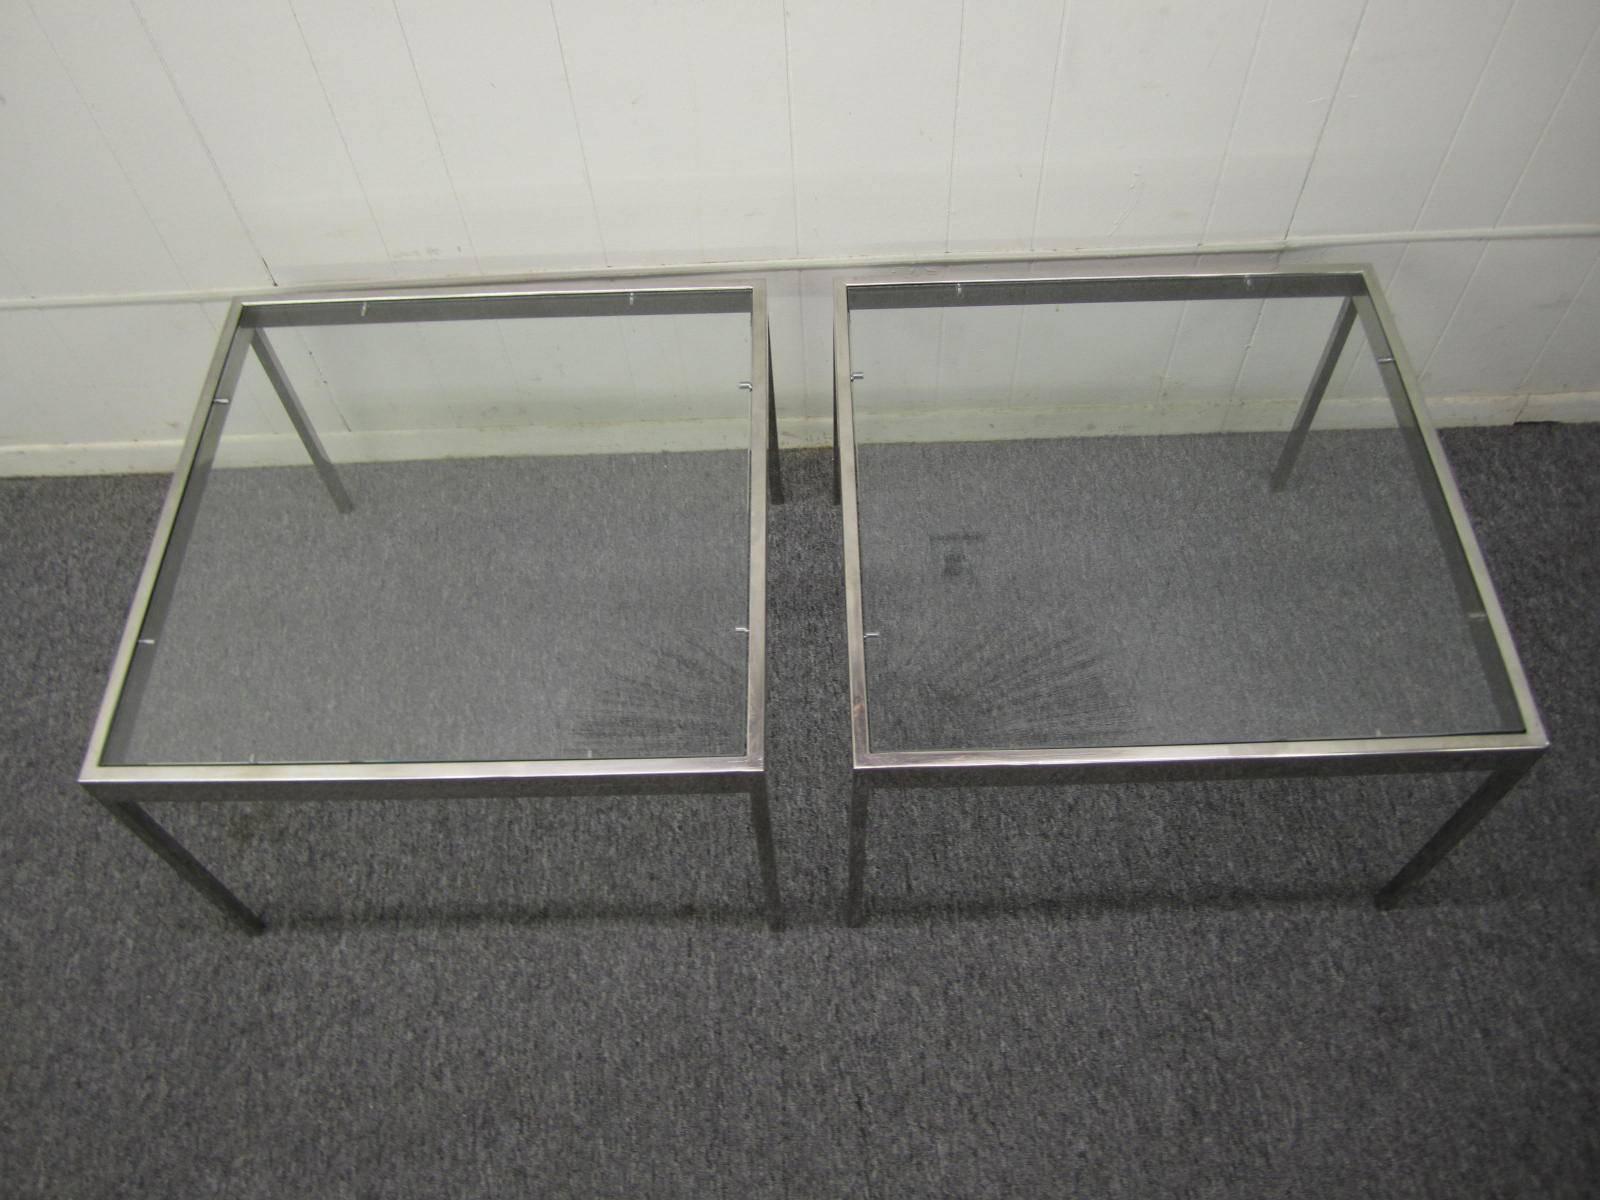 Handsome  pair of chrome and glass Milo Baughman side end tables.  Very simplistic heavy chrome frame with new glass.  